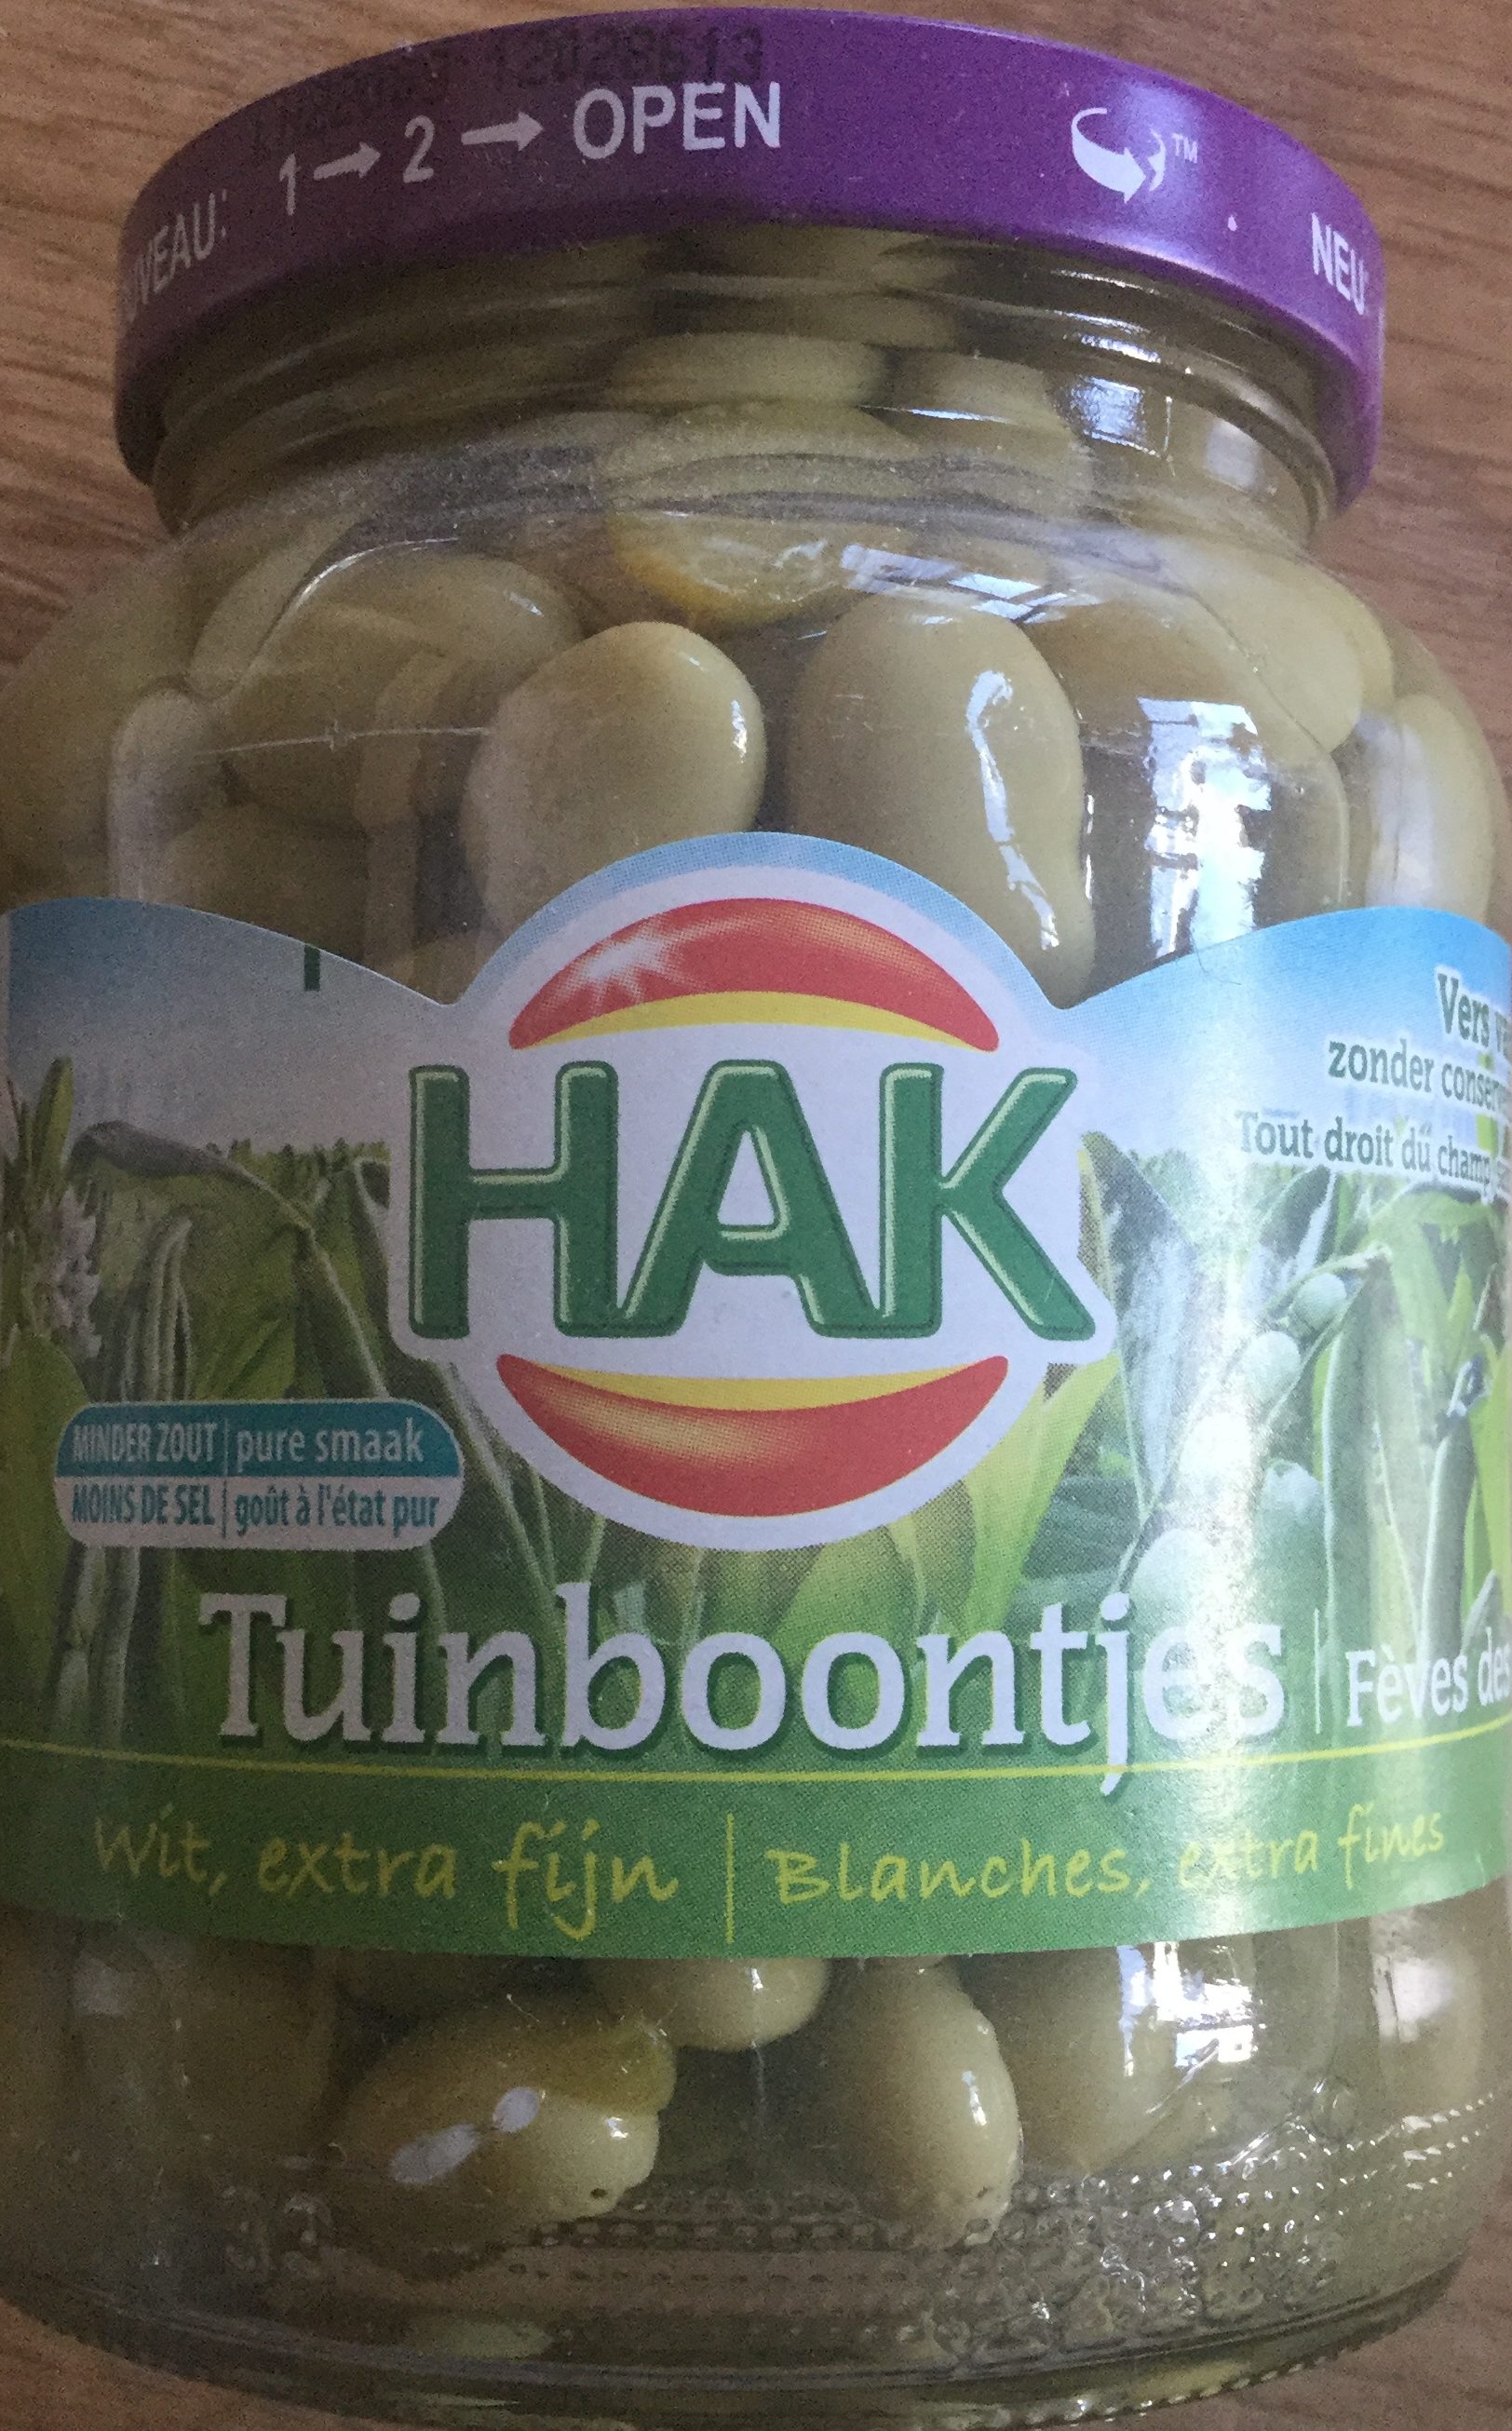 Tuinboontjes - Product